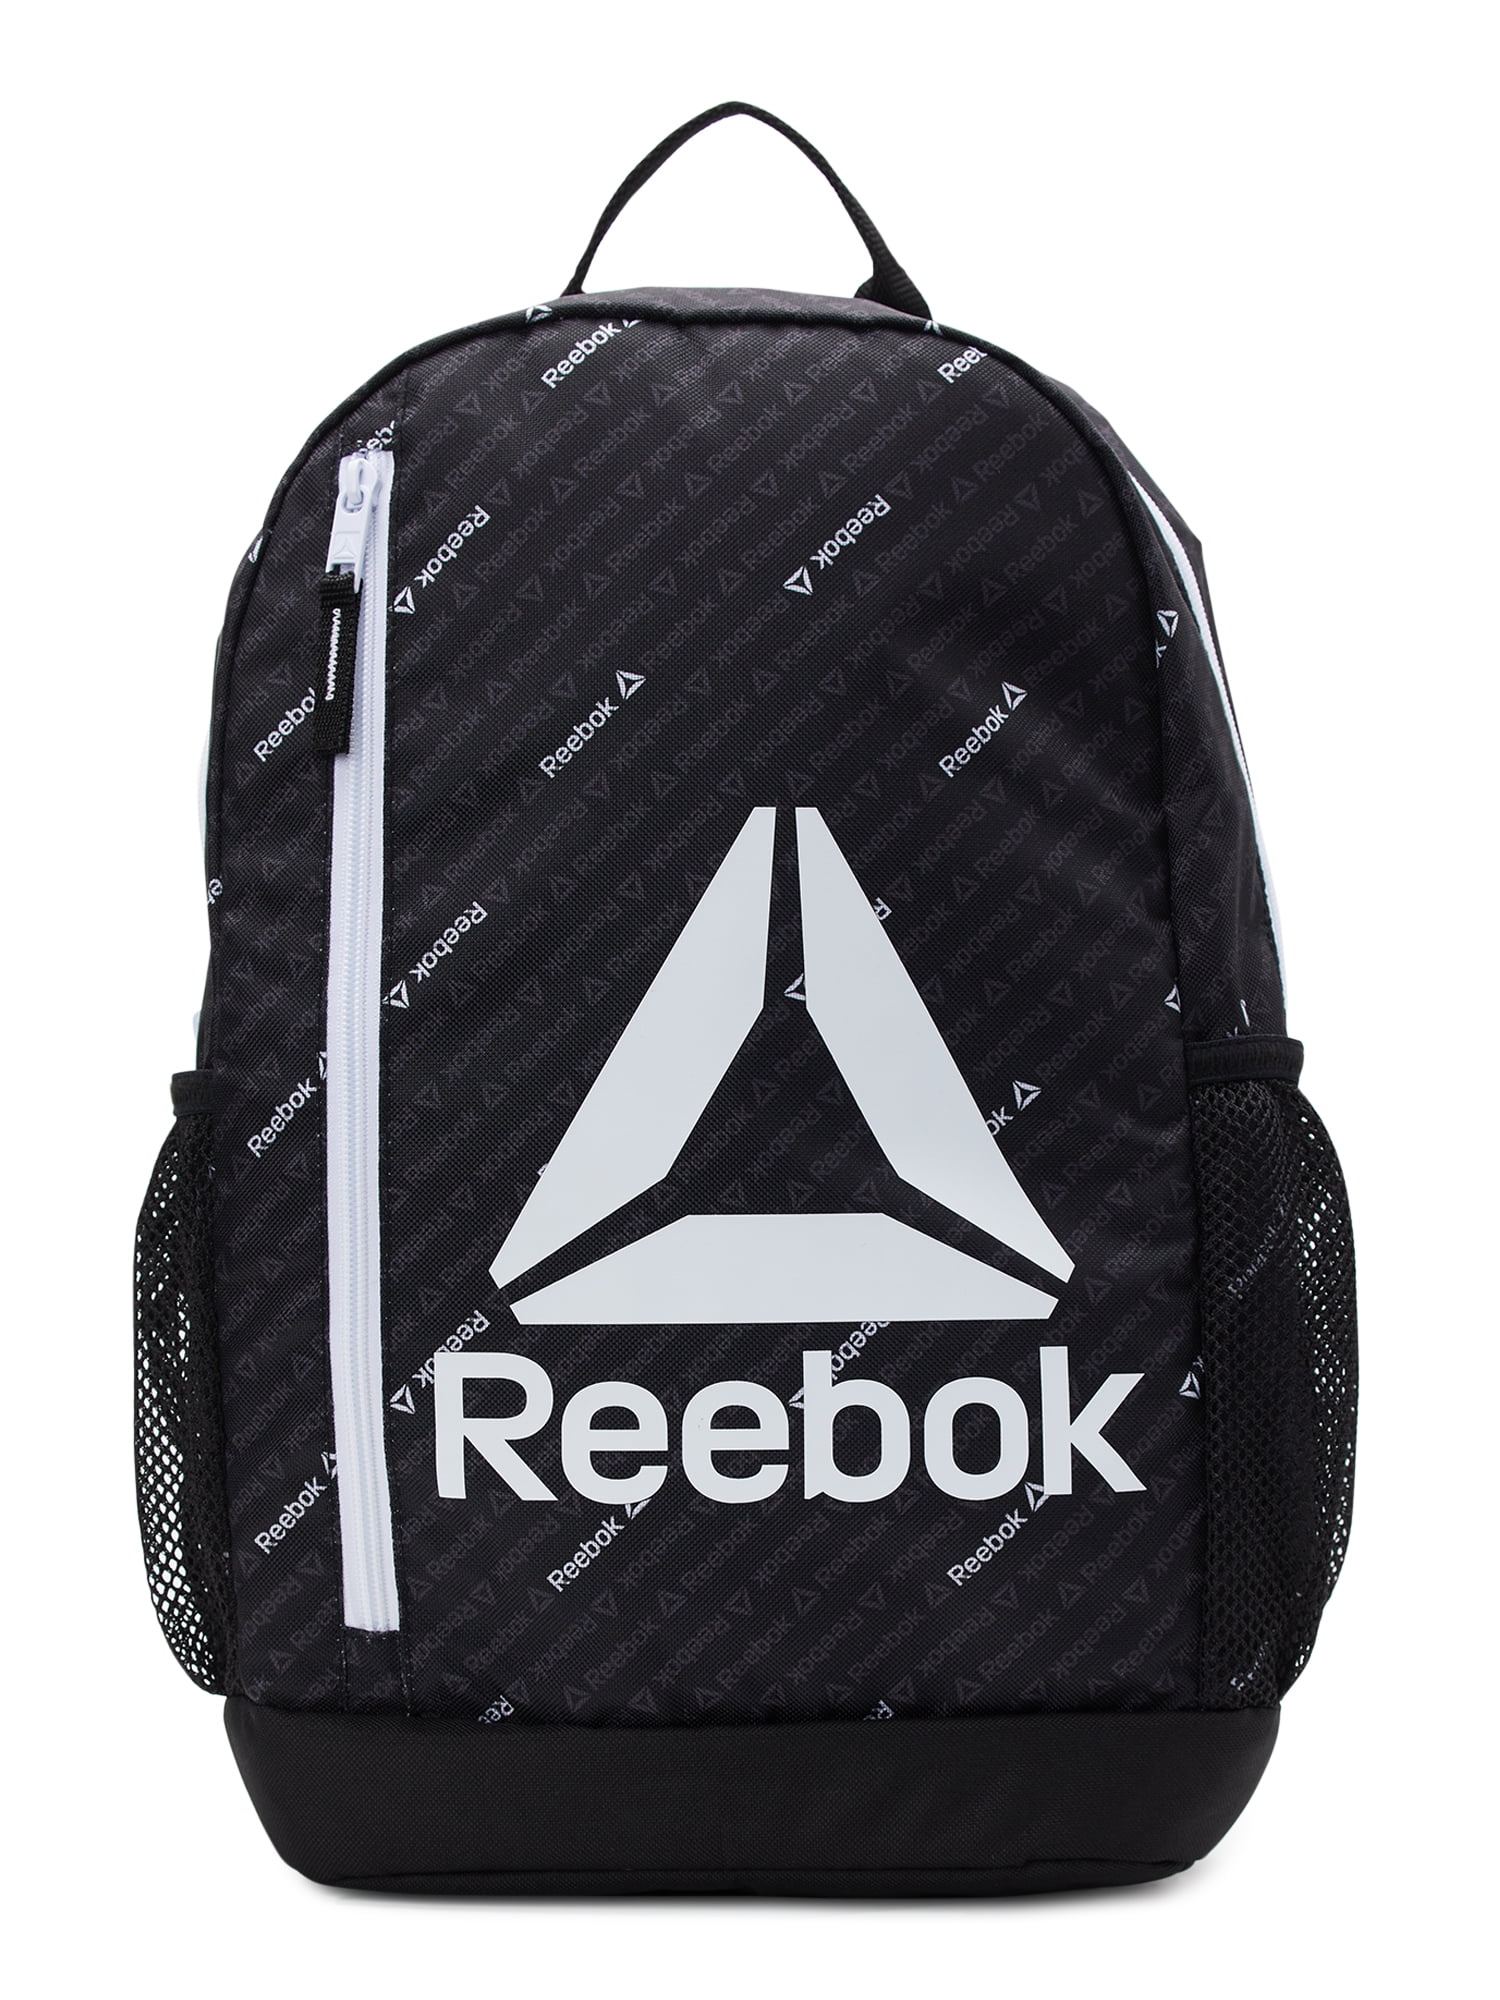 Reebok Childrens Reese Unisex Laptop Backpack, Black and White ...